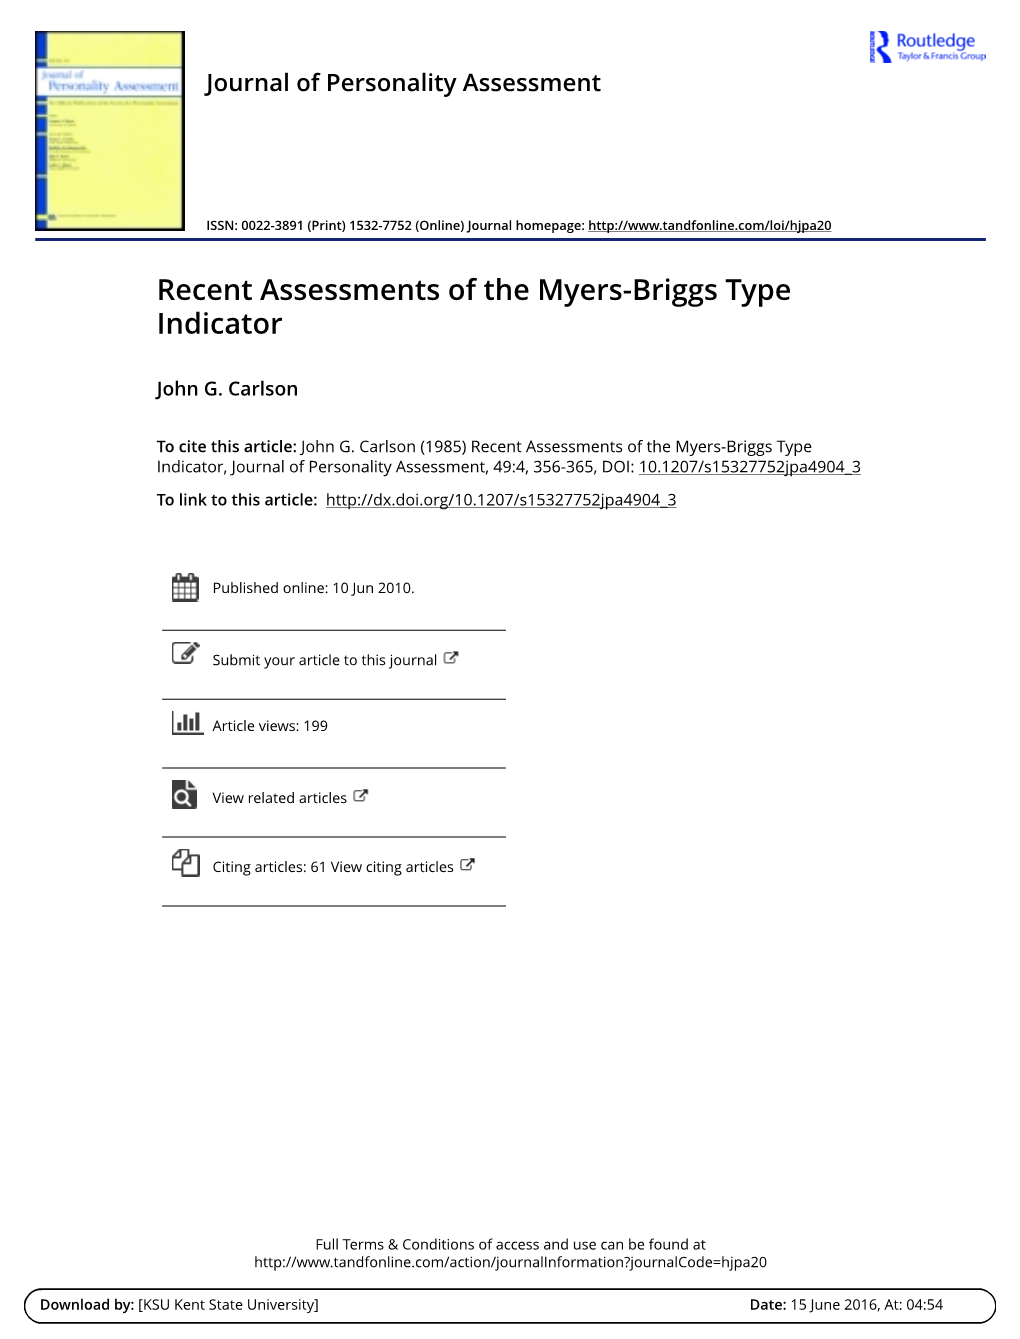 Recent Assessments of the Myers-Briggs Type Indicator